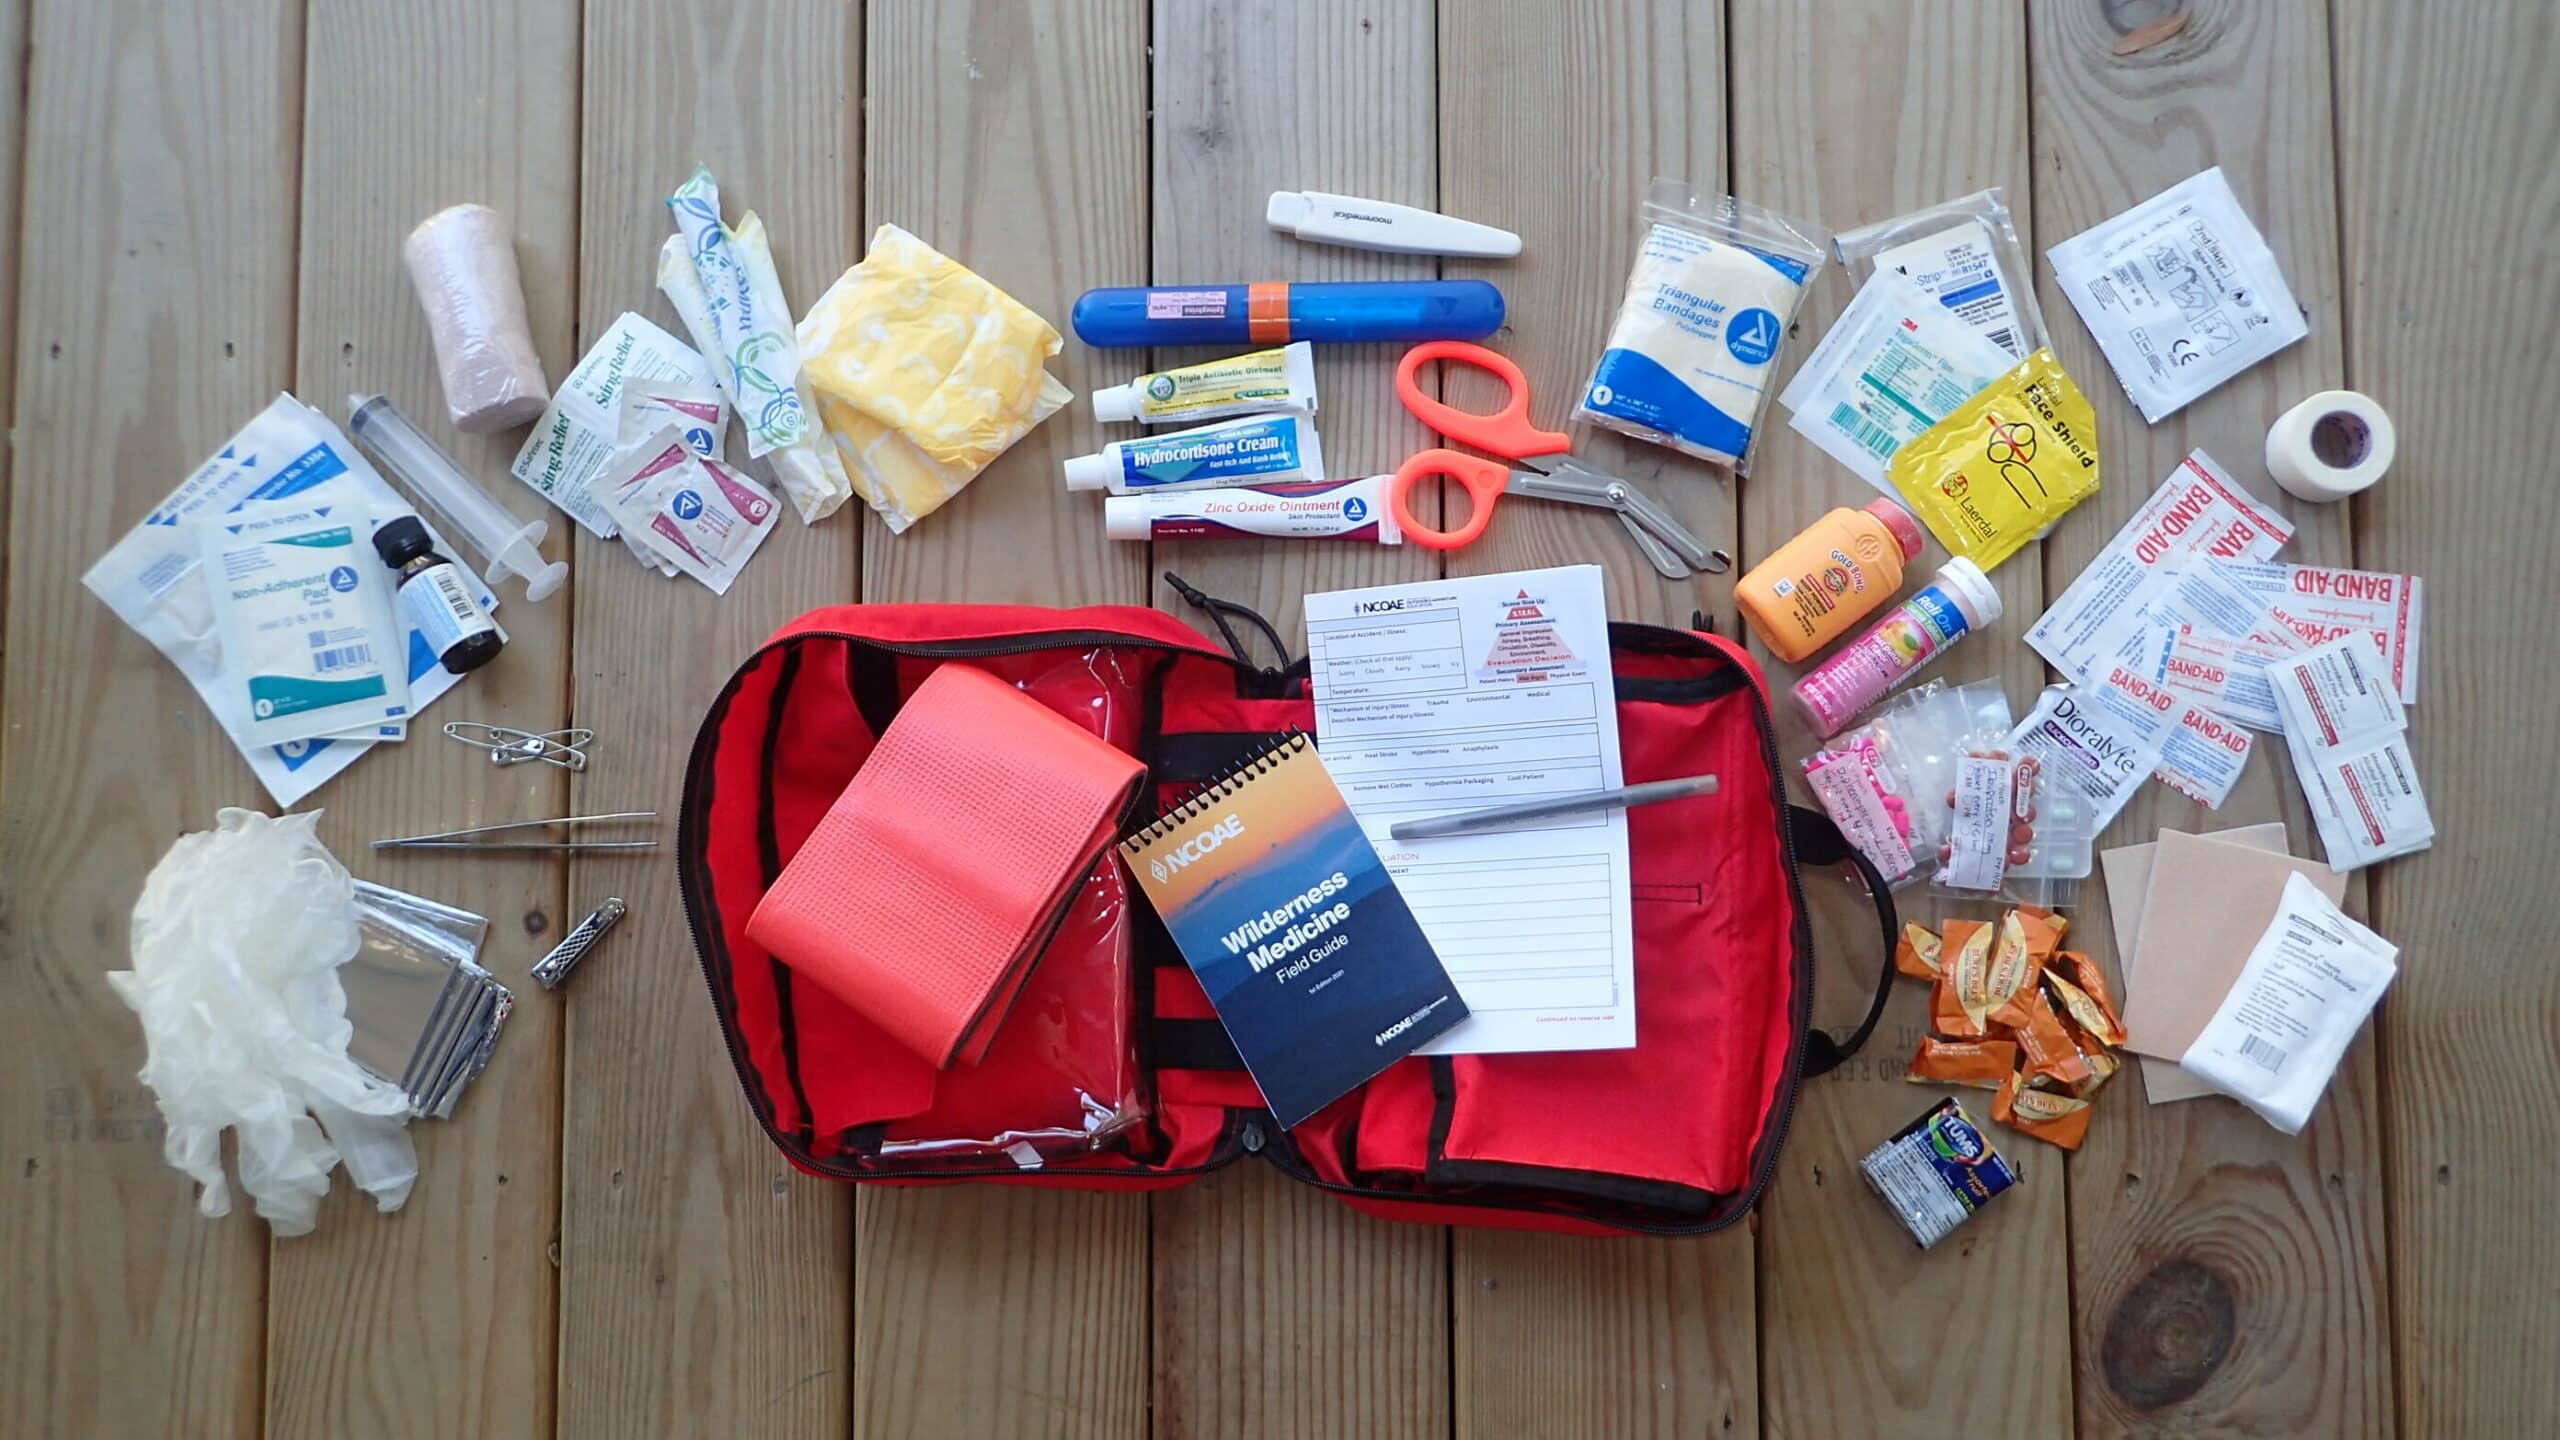 ADVANCED Outdoor FIRST AID Kit - Hiking, backpacking, wilderness